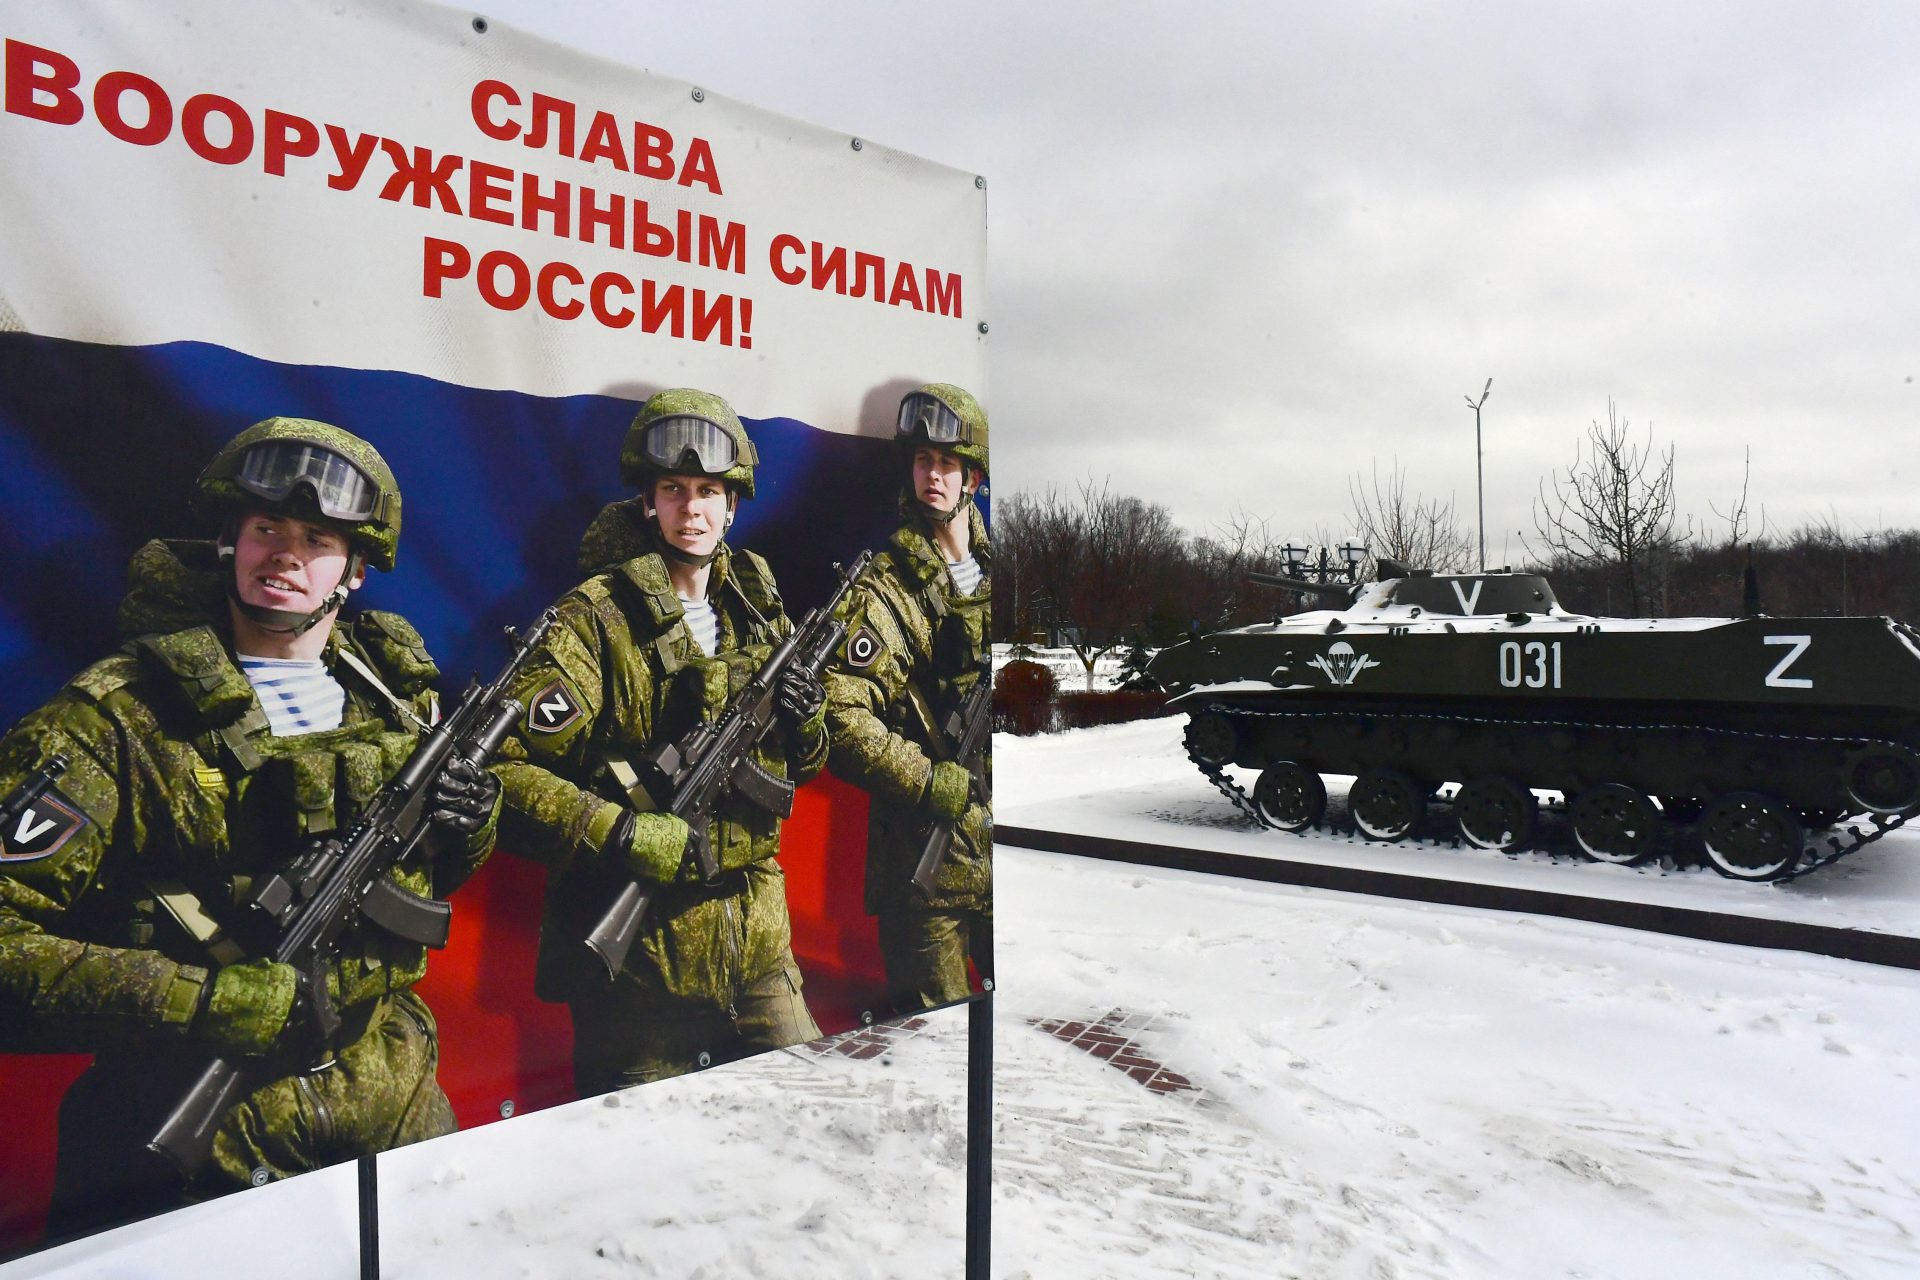 <p>Vladimir Putin's invasion of Ukraine has taken a major toll on the Russian military and a March 3rd estimate by the British Ministry of Defence reported that Moscow has likely lost over three hundred and fifty thousand killed or wounded soldiers.</p>